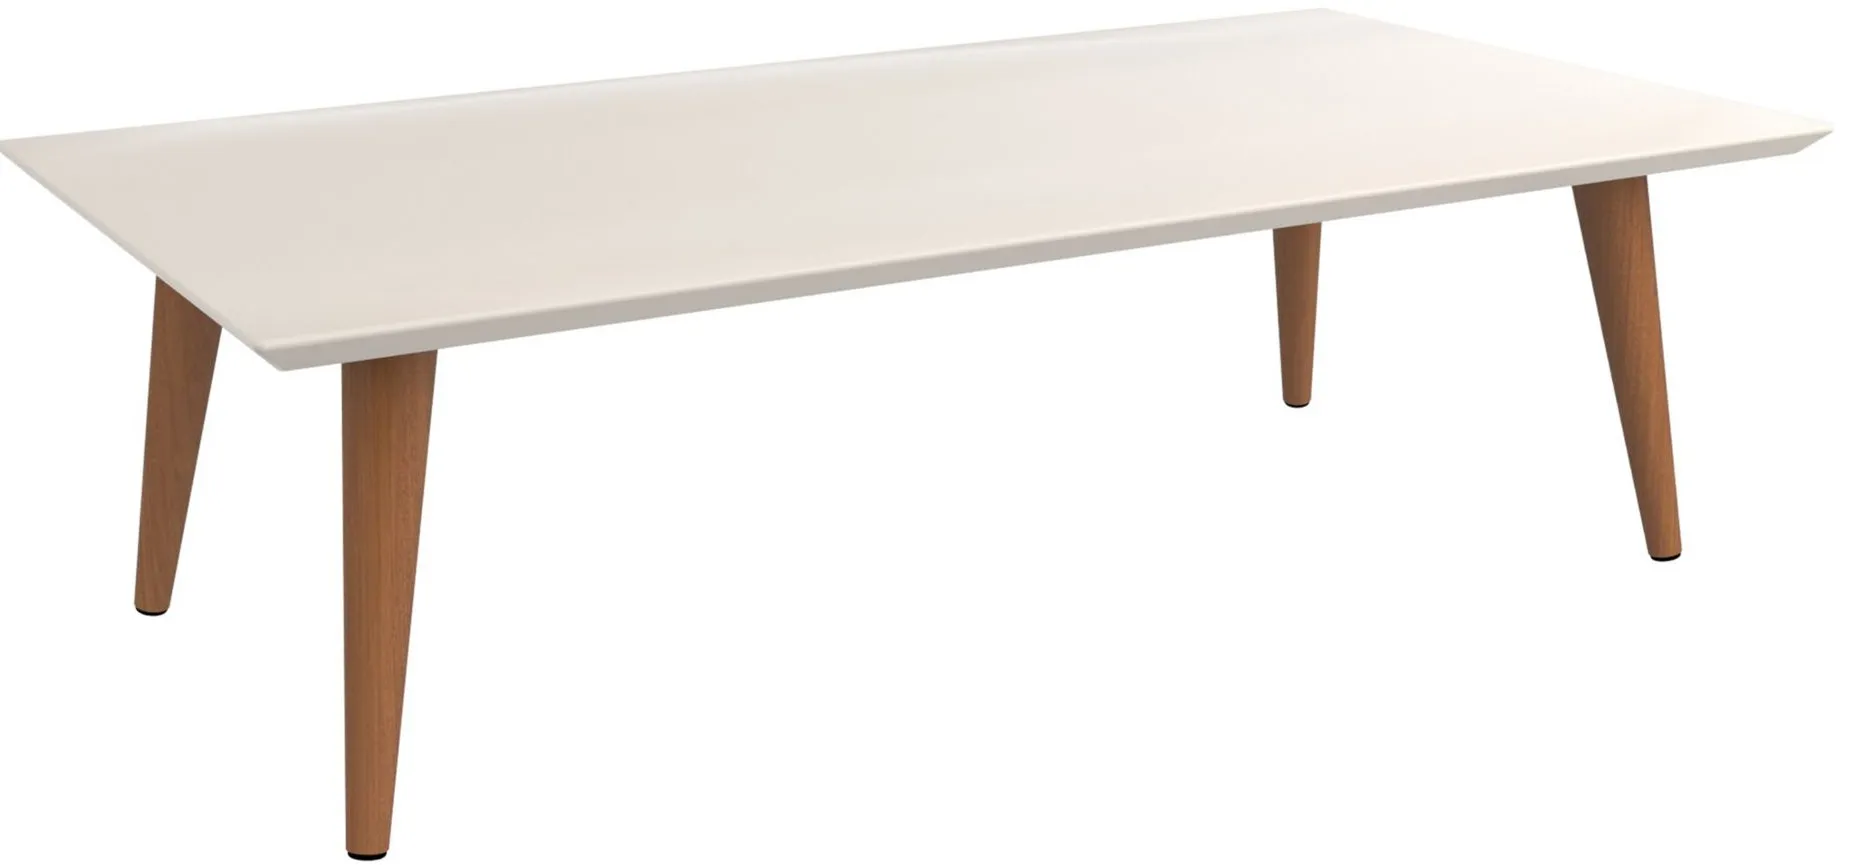 Utopia Low Rectangle End Table in Off White by Manhattan Comfort